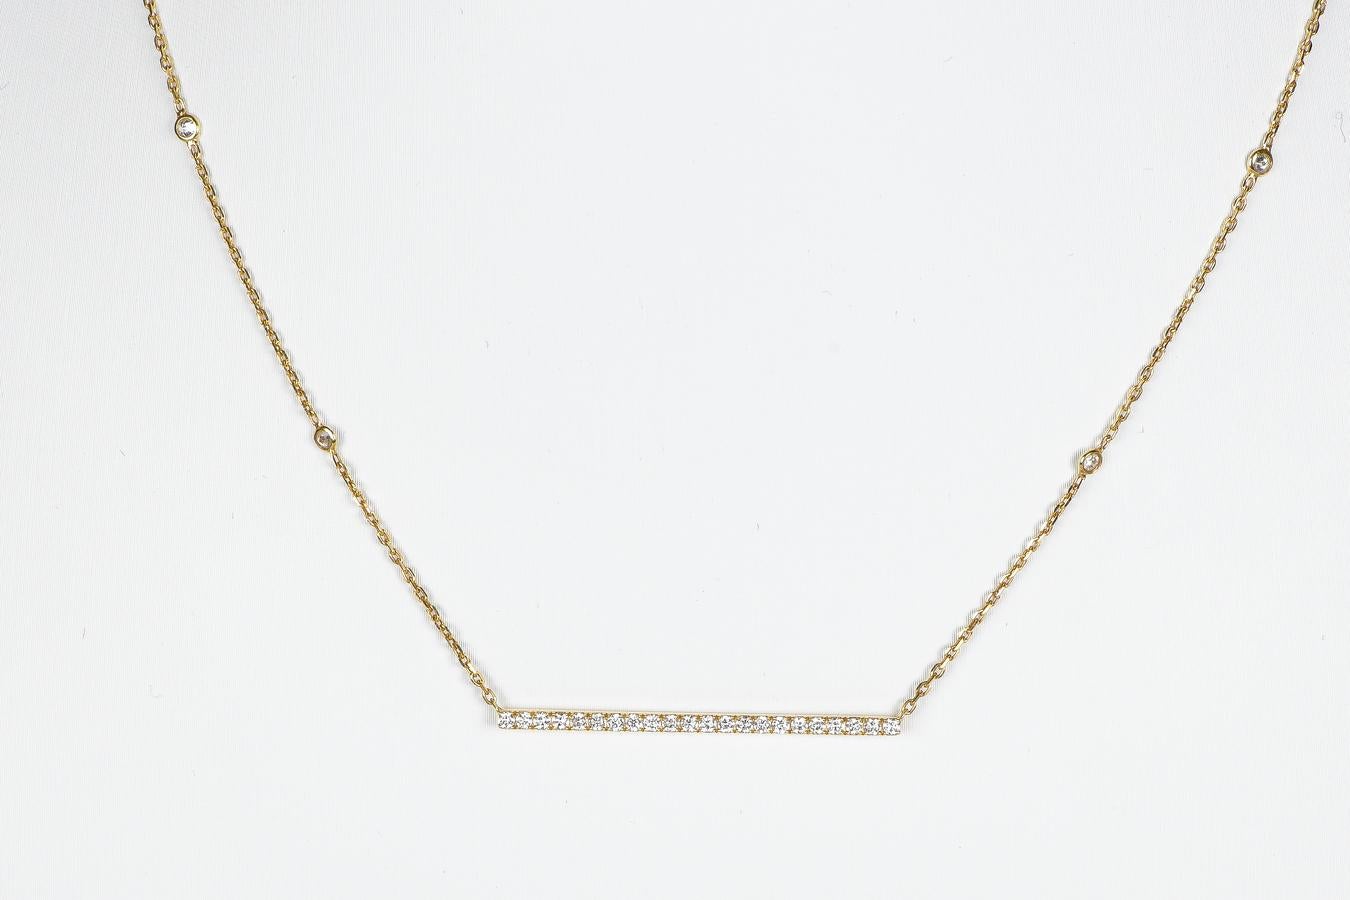 18K yellow gold necklace set with a total of 27 round brilliant diamonds. Including 22 of 0.015 carats on the horizontal pendant. 4 diamonds of 0.02 carats on the chain. And 1 diamond, 0.01 carats, on the pierced clasp pendant. The diamonds total